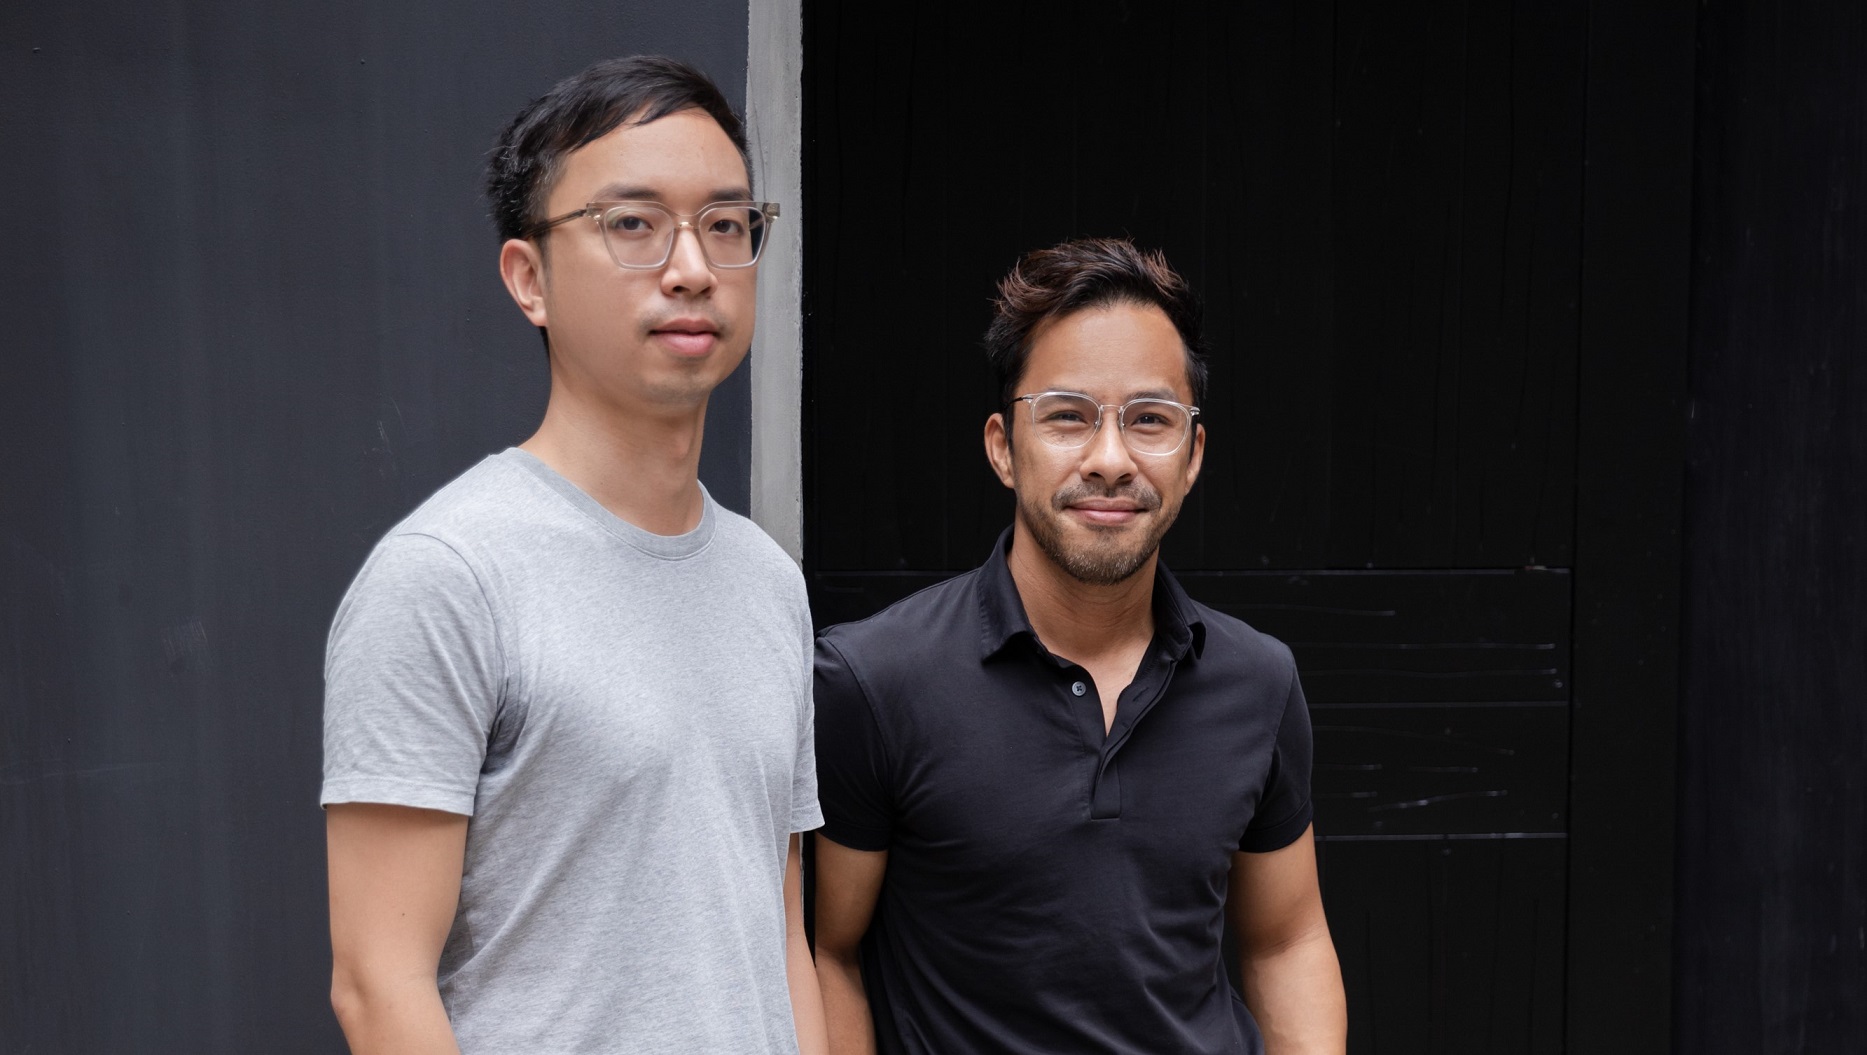 Hao CEO (left) and Guy President (right), both Vietcetera co-founders